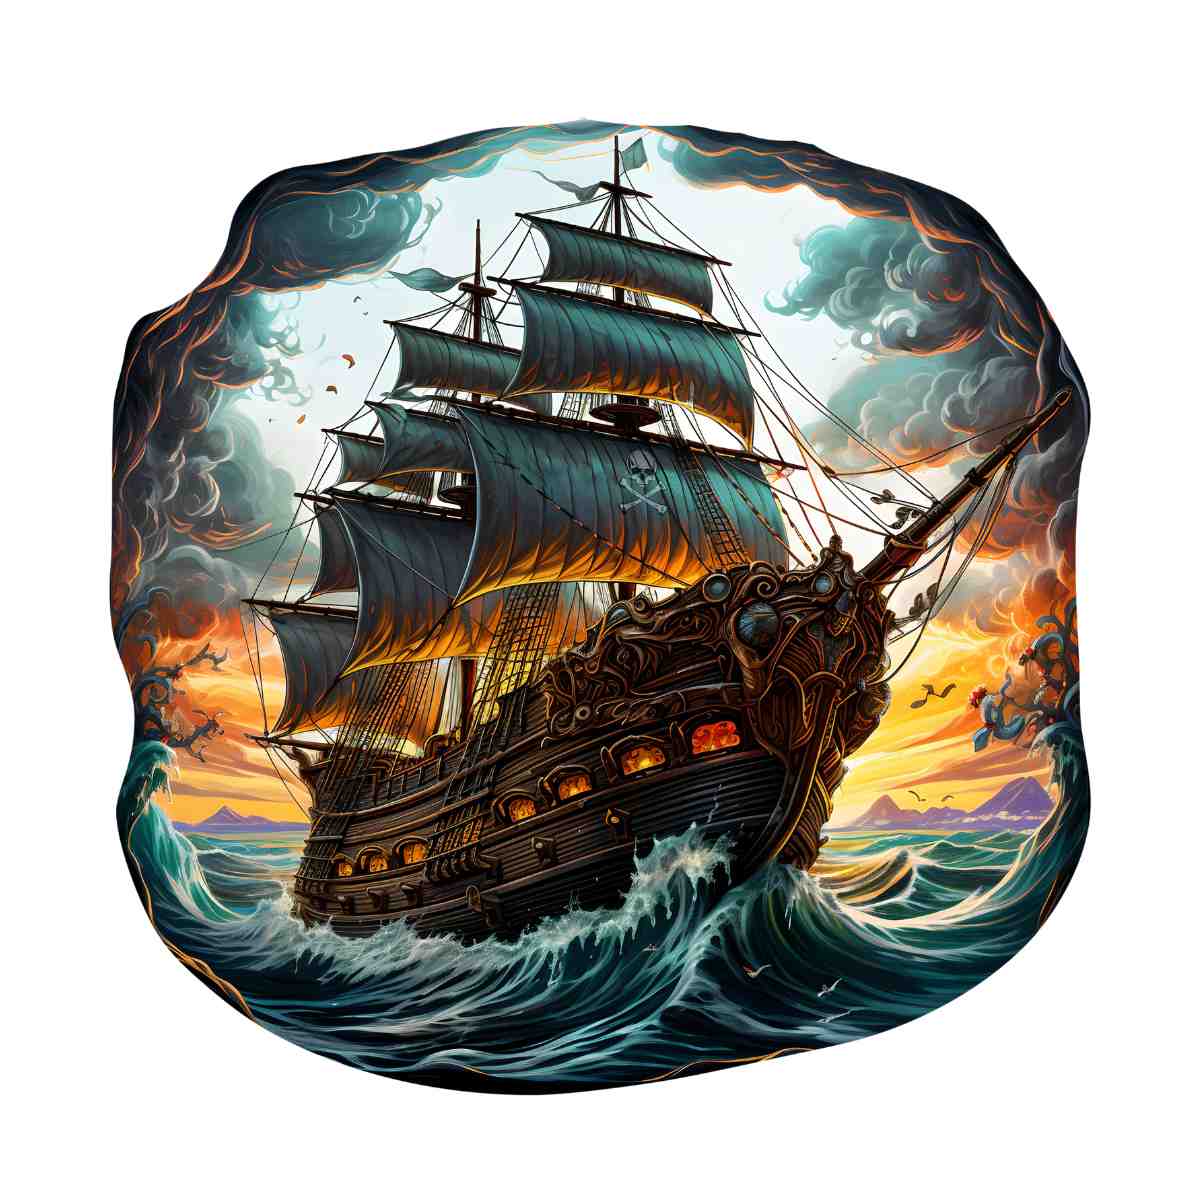 Animal Jigsaw Puzzle > Wooden Jigsaw Puzzle > Jigsaw Puzzle Ghost Ship - Jigsaw Puzzle